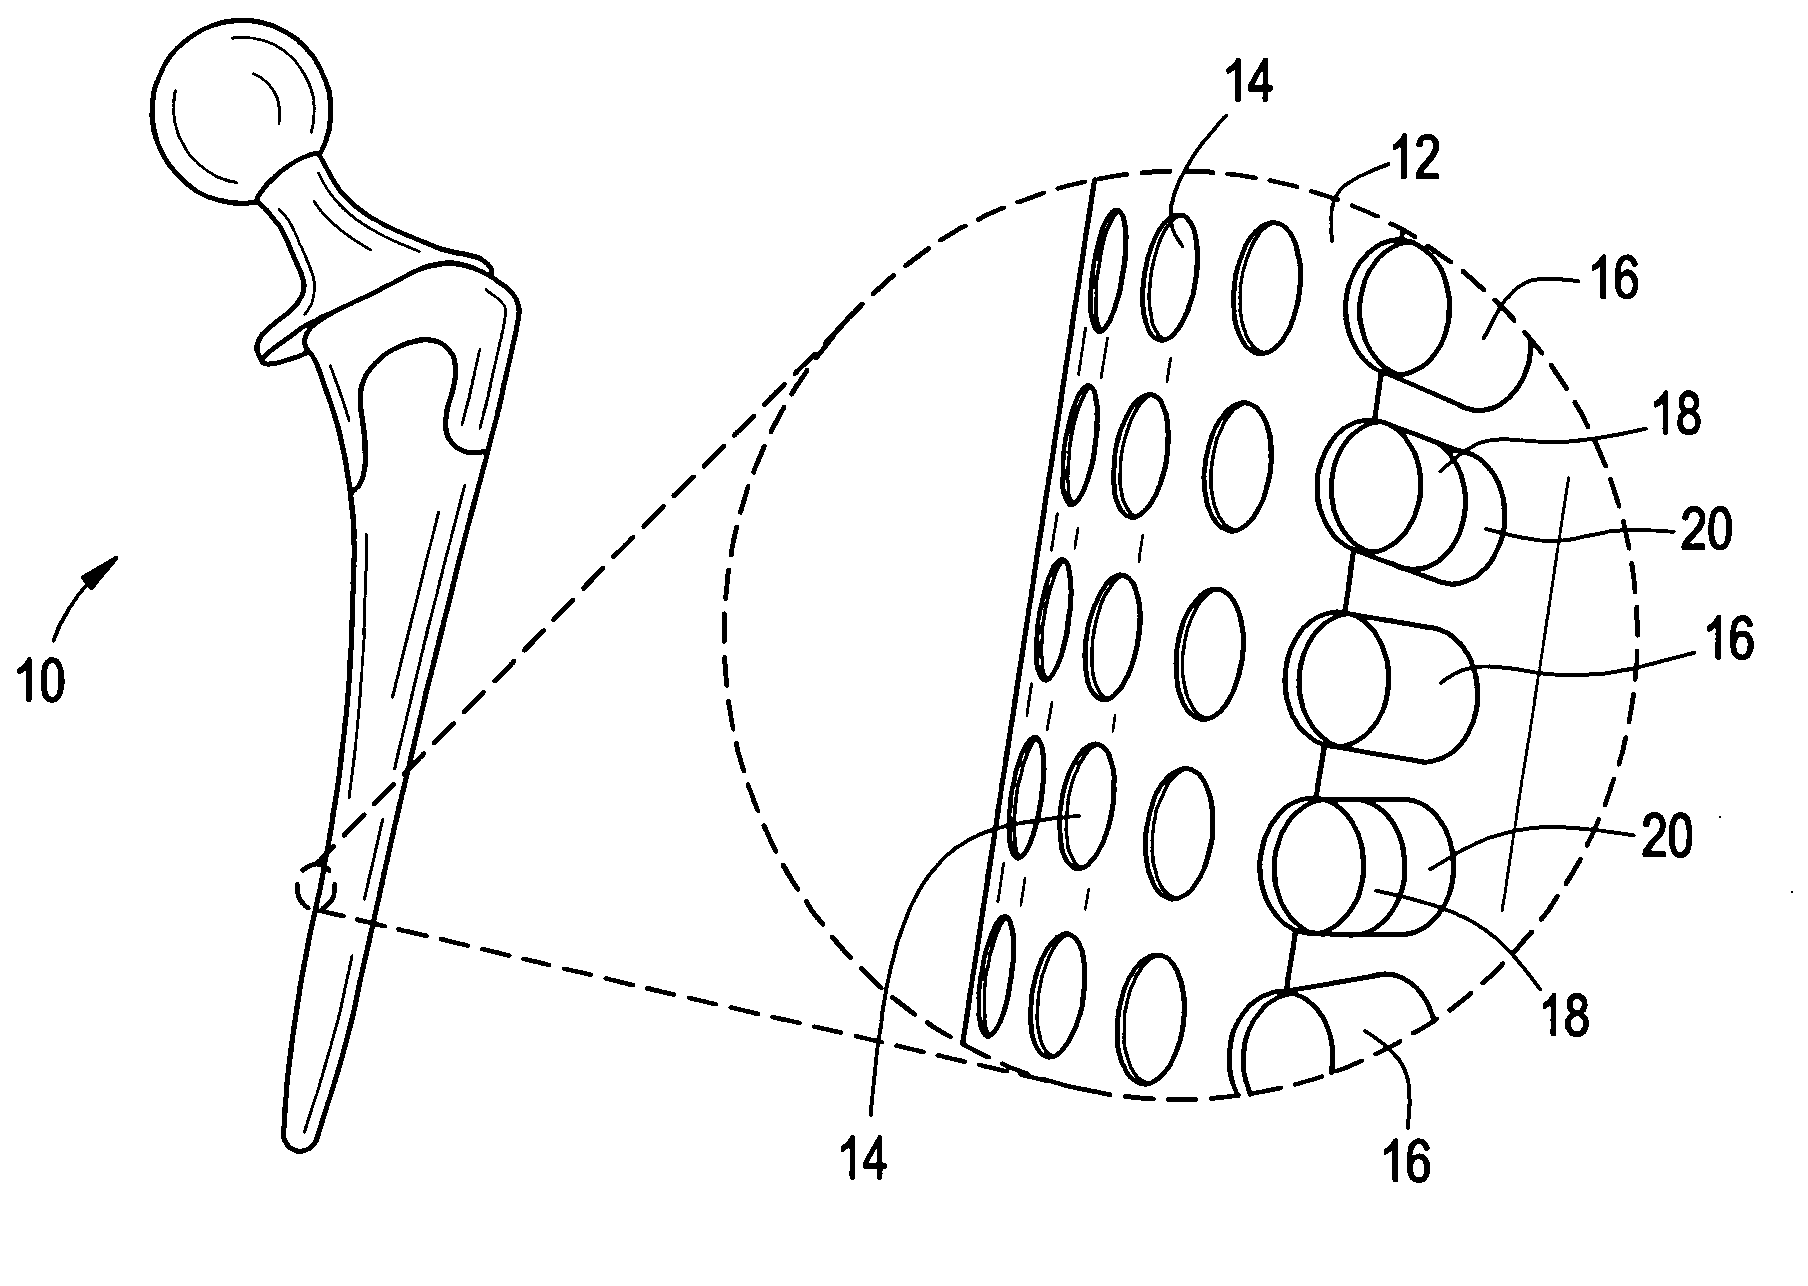 Orthopedic and dental implant devices providing controlled drug delivery